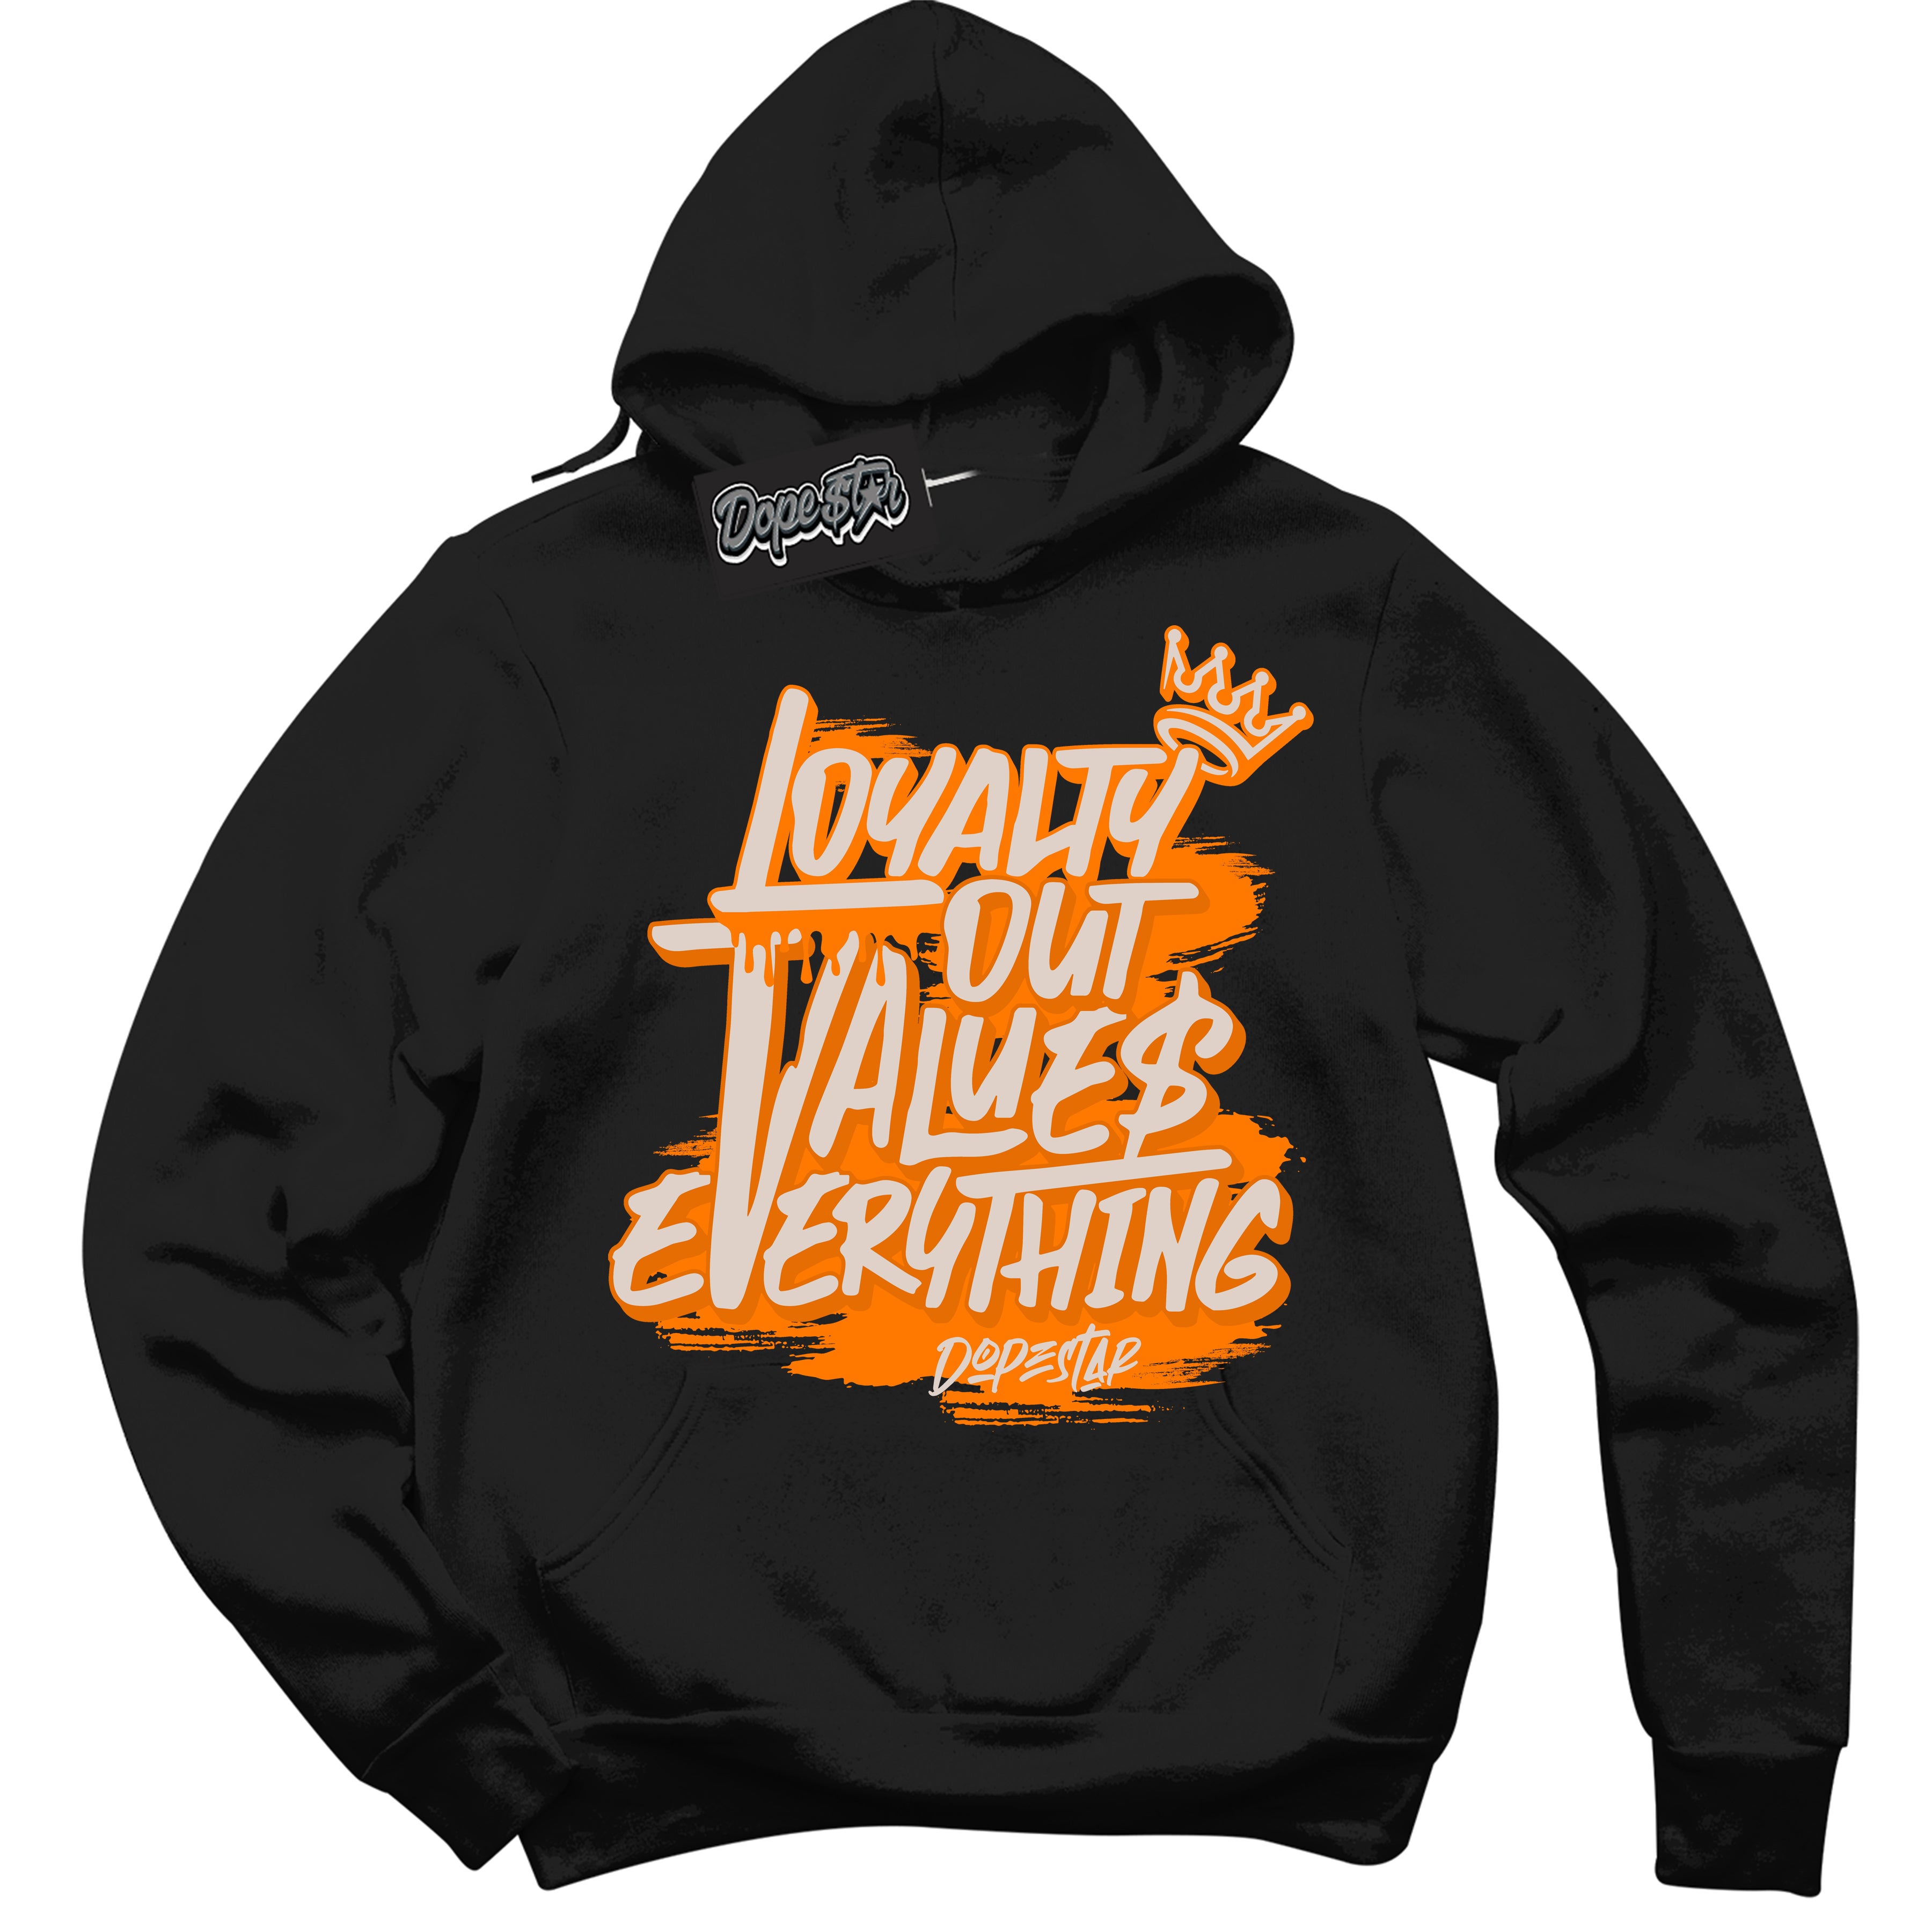 Cool Black Hoodie with “ Loyalty Out Values Everything ”  design that Perfectly Matches  Peach Cream Sneakers.